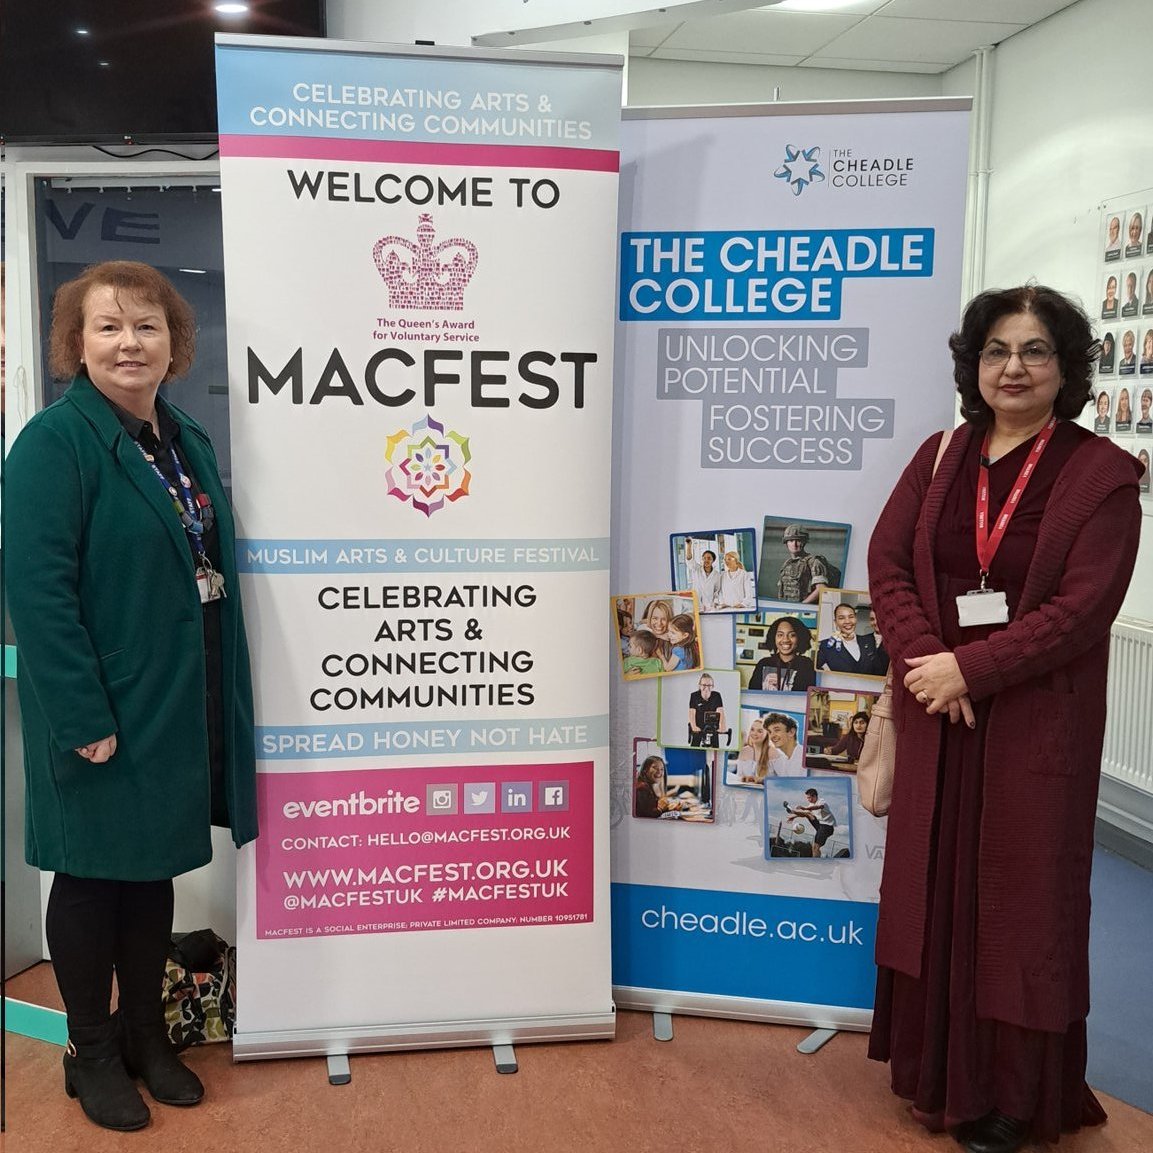 Yesterday our students and staff celebrated @MACFESTUK, with dancing, music, fashion shows, food, an art exhibition, and many more activities.💓

We also had a visit from @QaisraShahraz, who founded MACEST back in 2017.

#SpreadHoneyNotHate
#WeStandTogether